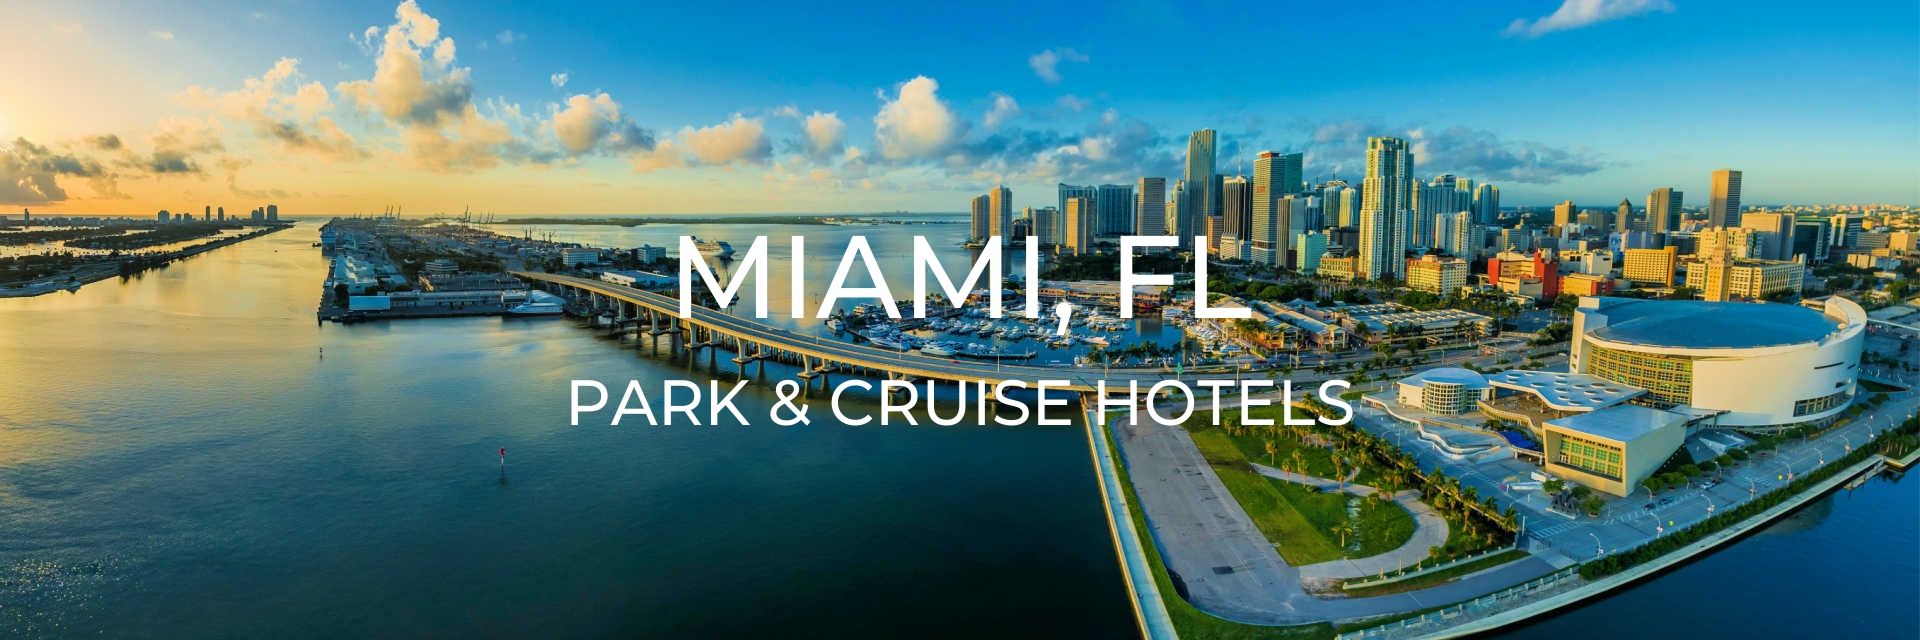 Miami Hotels Outlet Coupon Code Hotels 2020